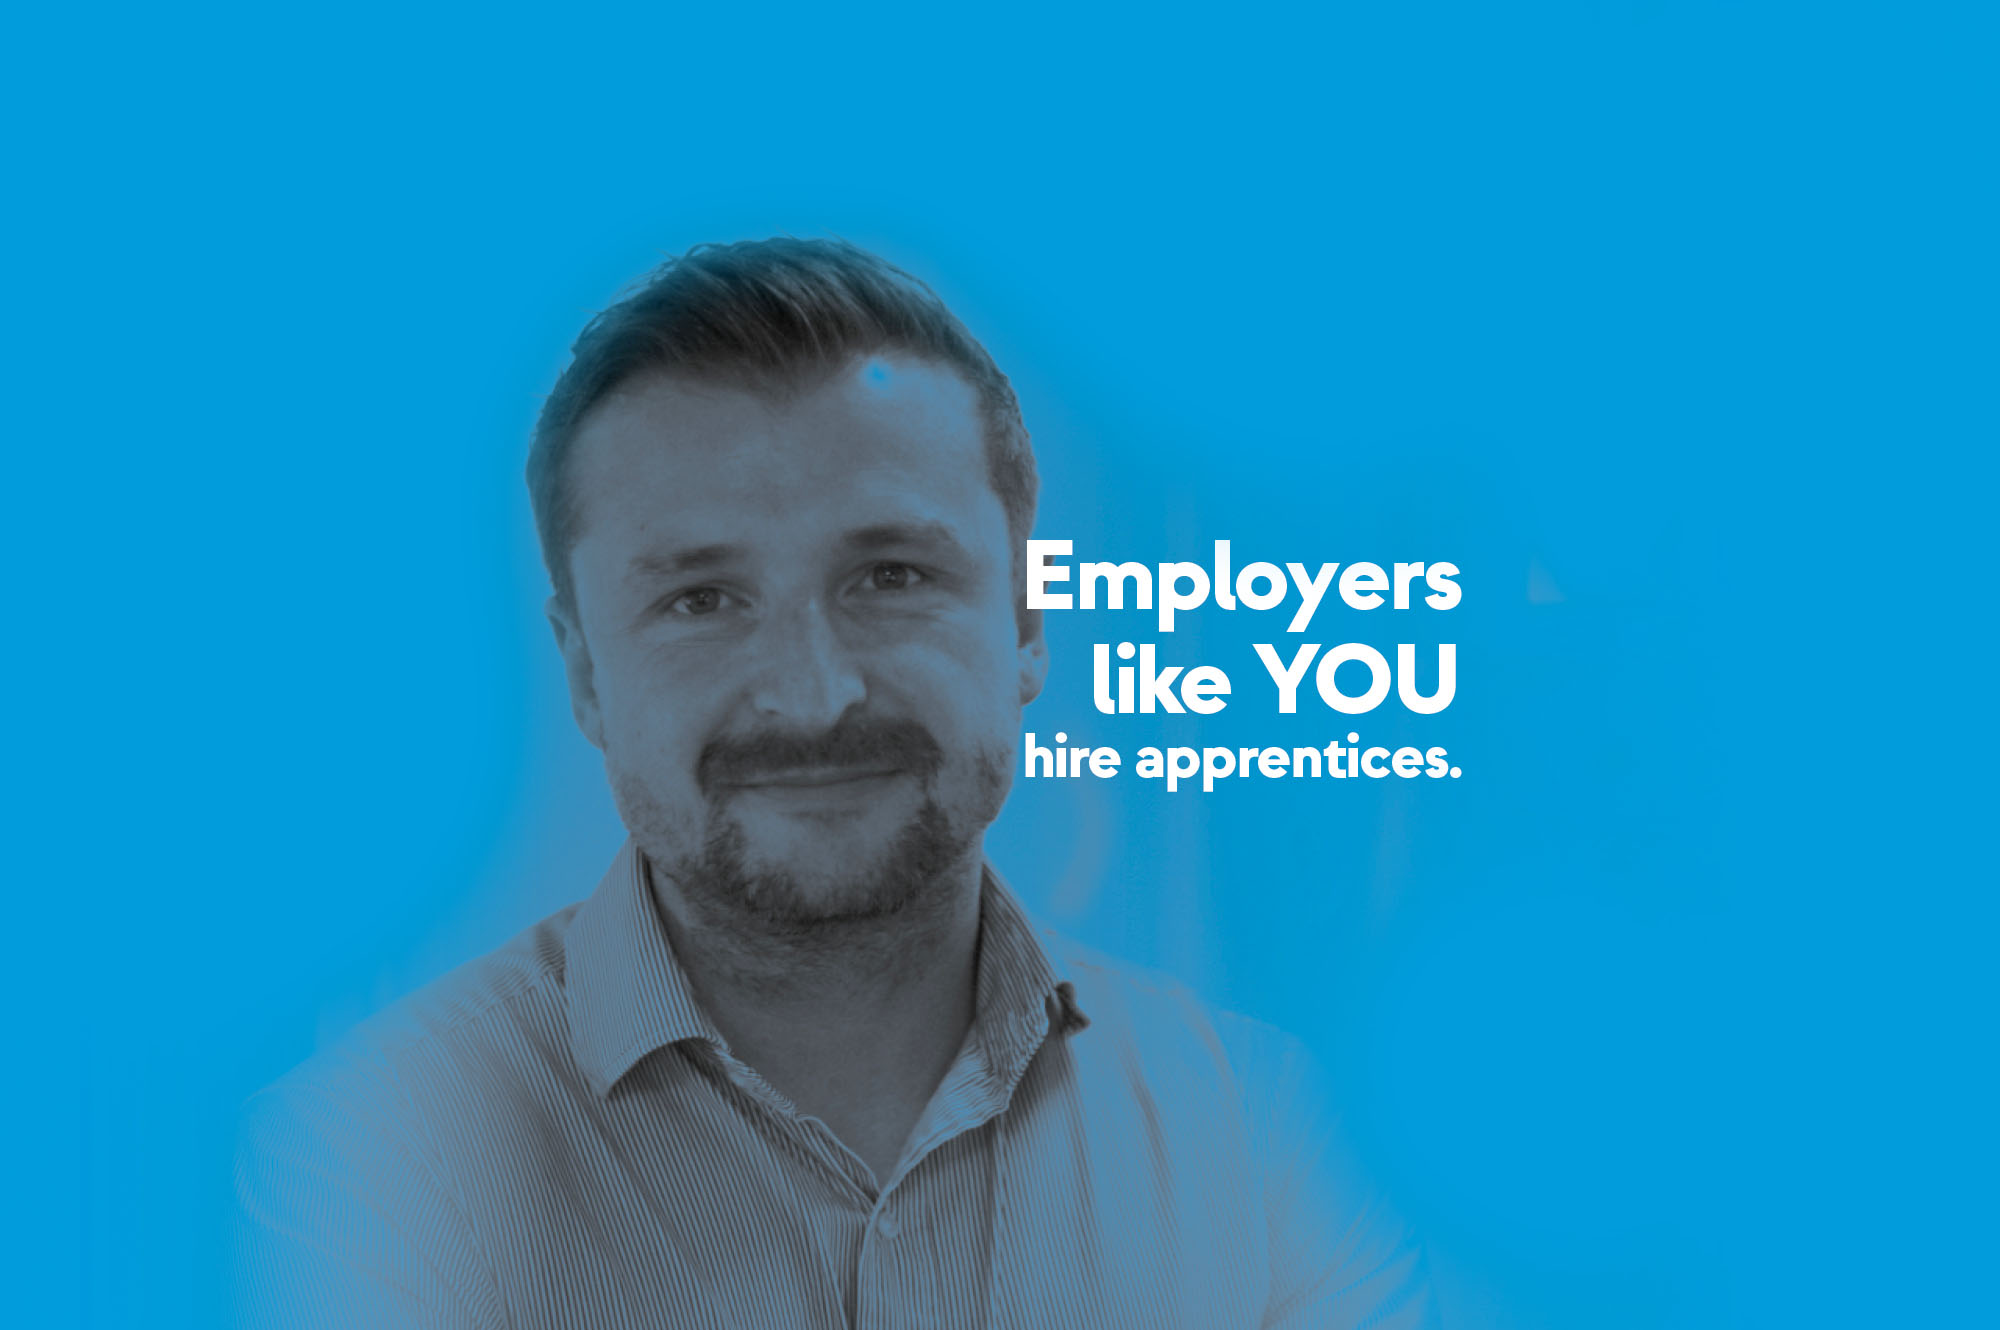 JTL reaches out to employers with new campaign: Employers like YOU hire apprentices